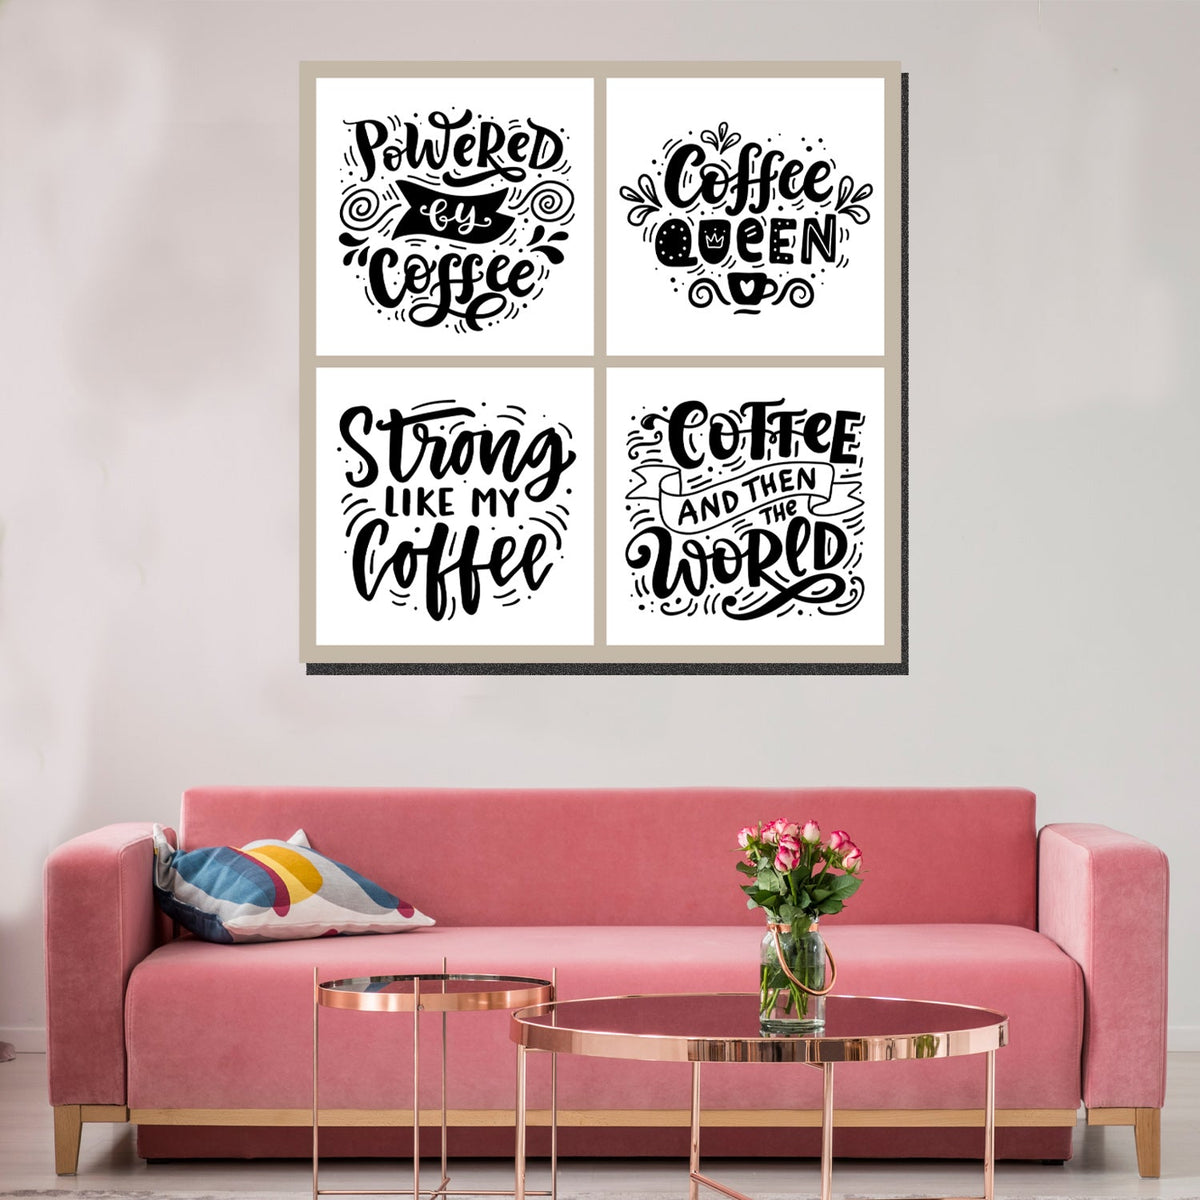 https://cdn.shopify.com/s/files/1/0387/9986/8044/products/CoffeeQueenPosterCanvasArtprintStretched-3.jpg